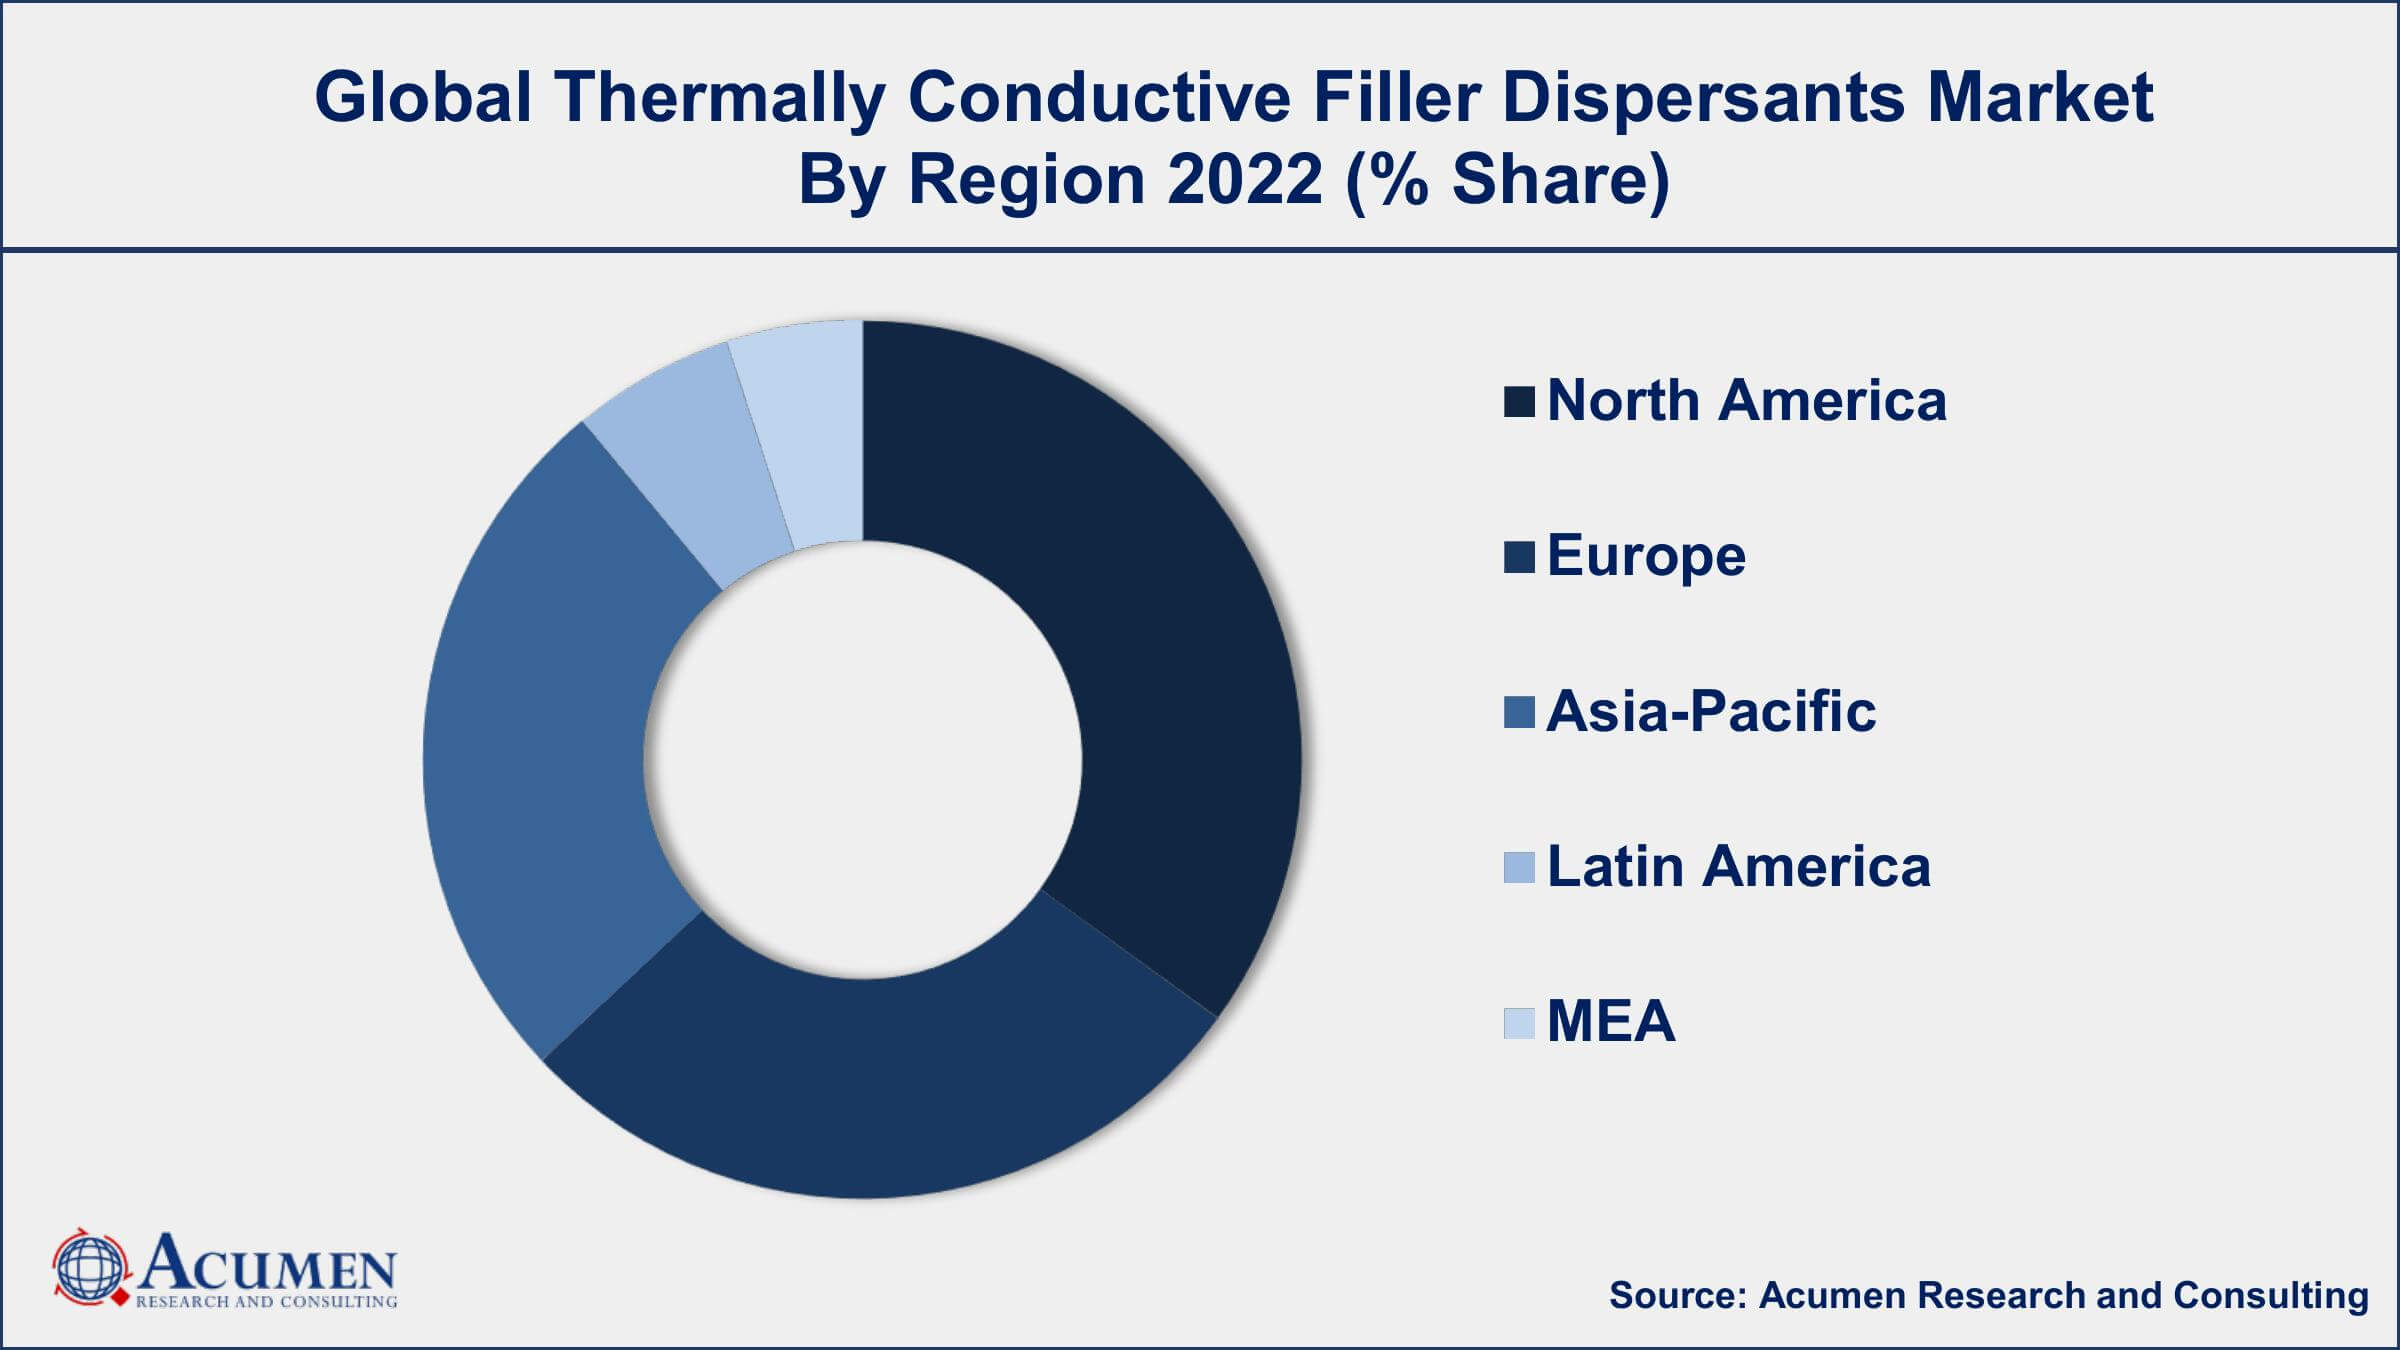 Thermally Conductive Filler Dispersants Market Drivers